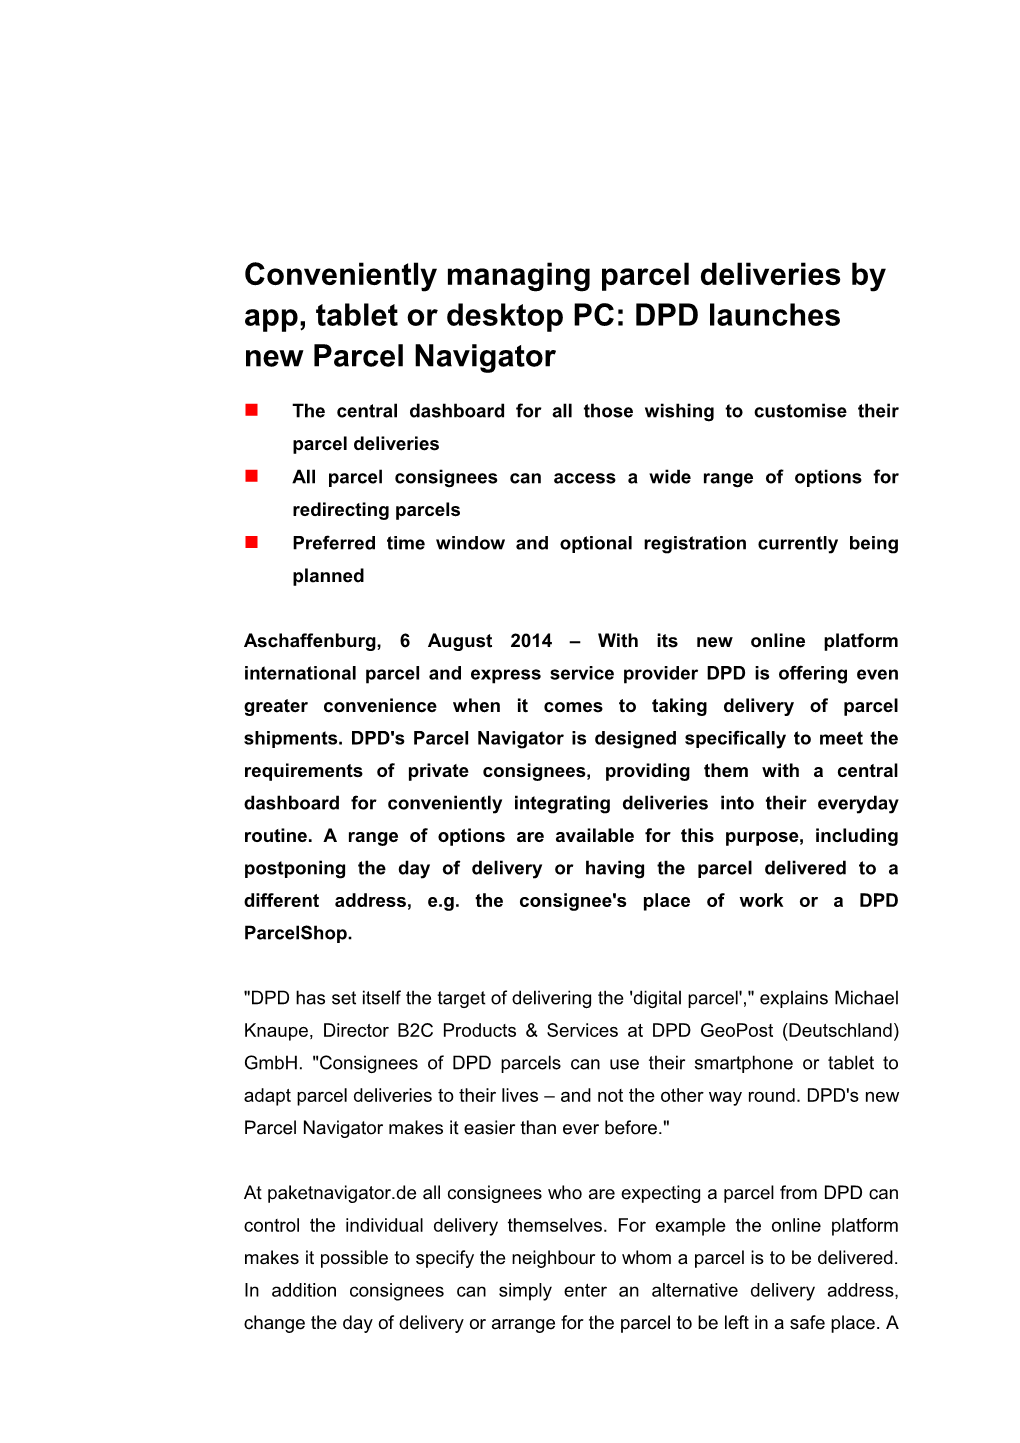 Conveniently Managing Parcel Deliveries by App, Tablet Or Desktop PC: DPD Launches New